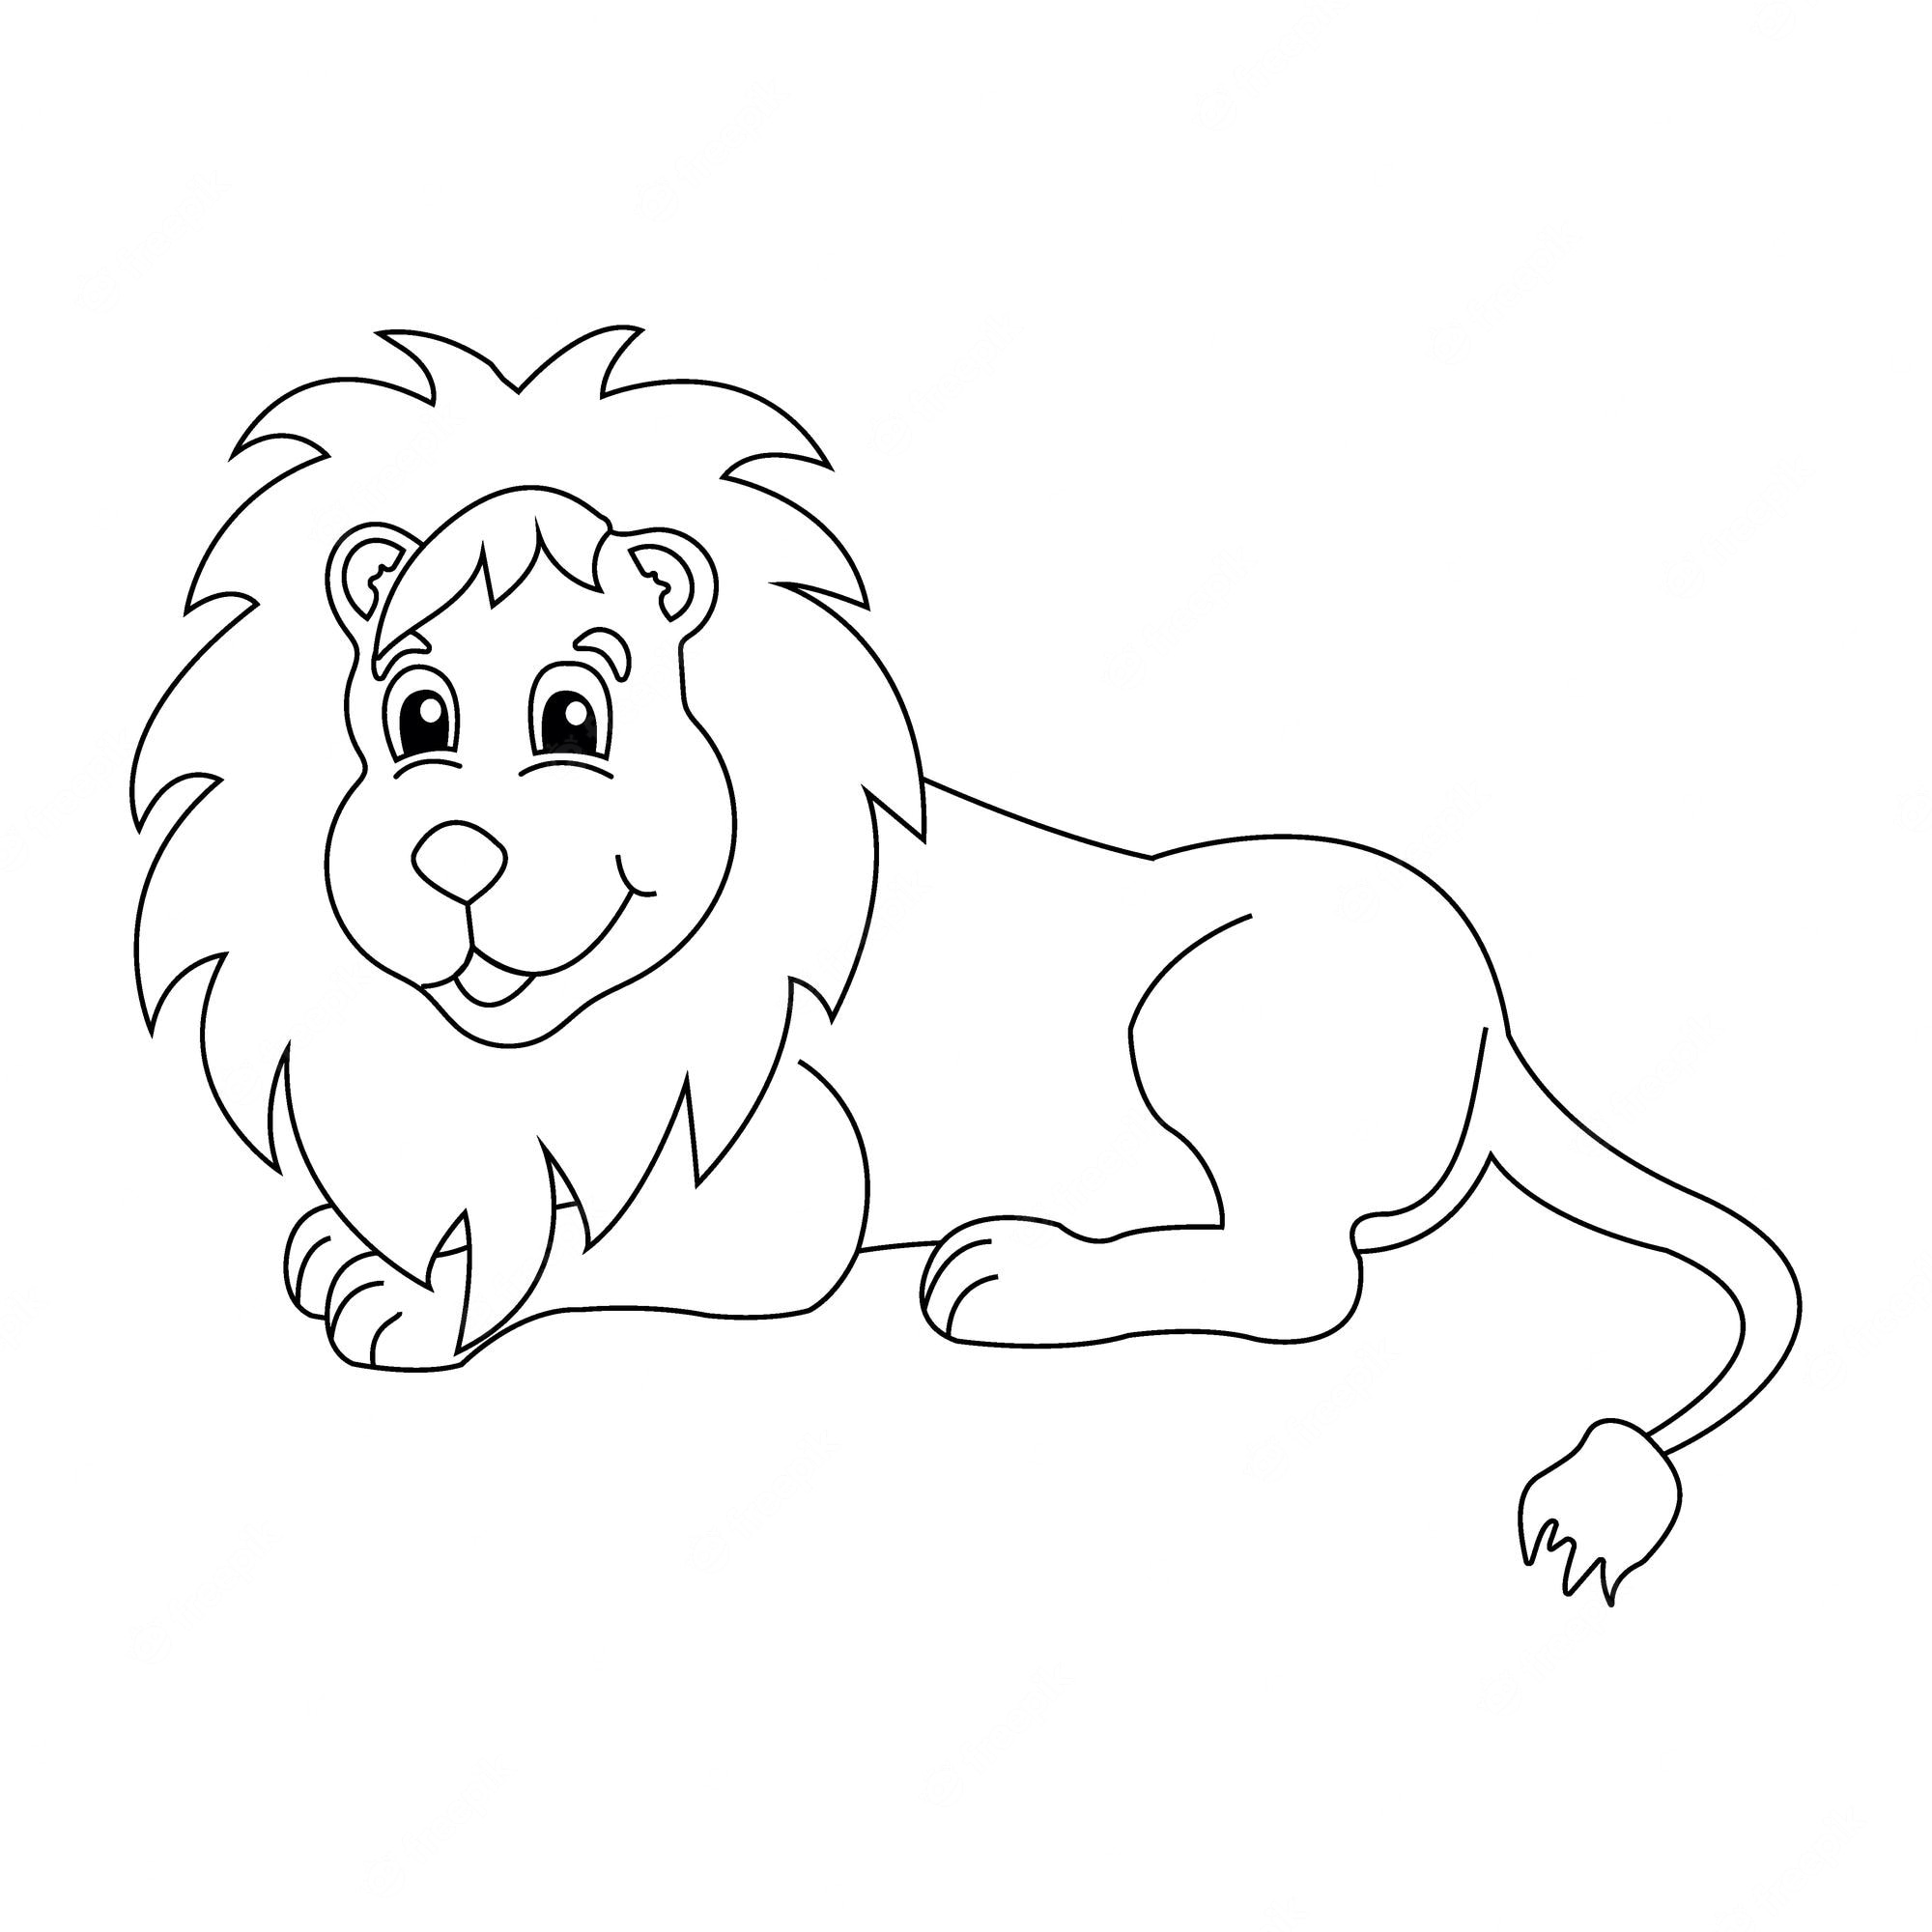 Lion character for kid coloring book - SheetalColor.com